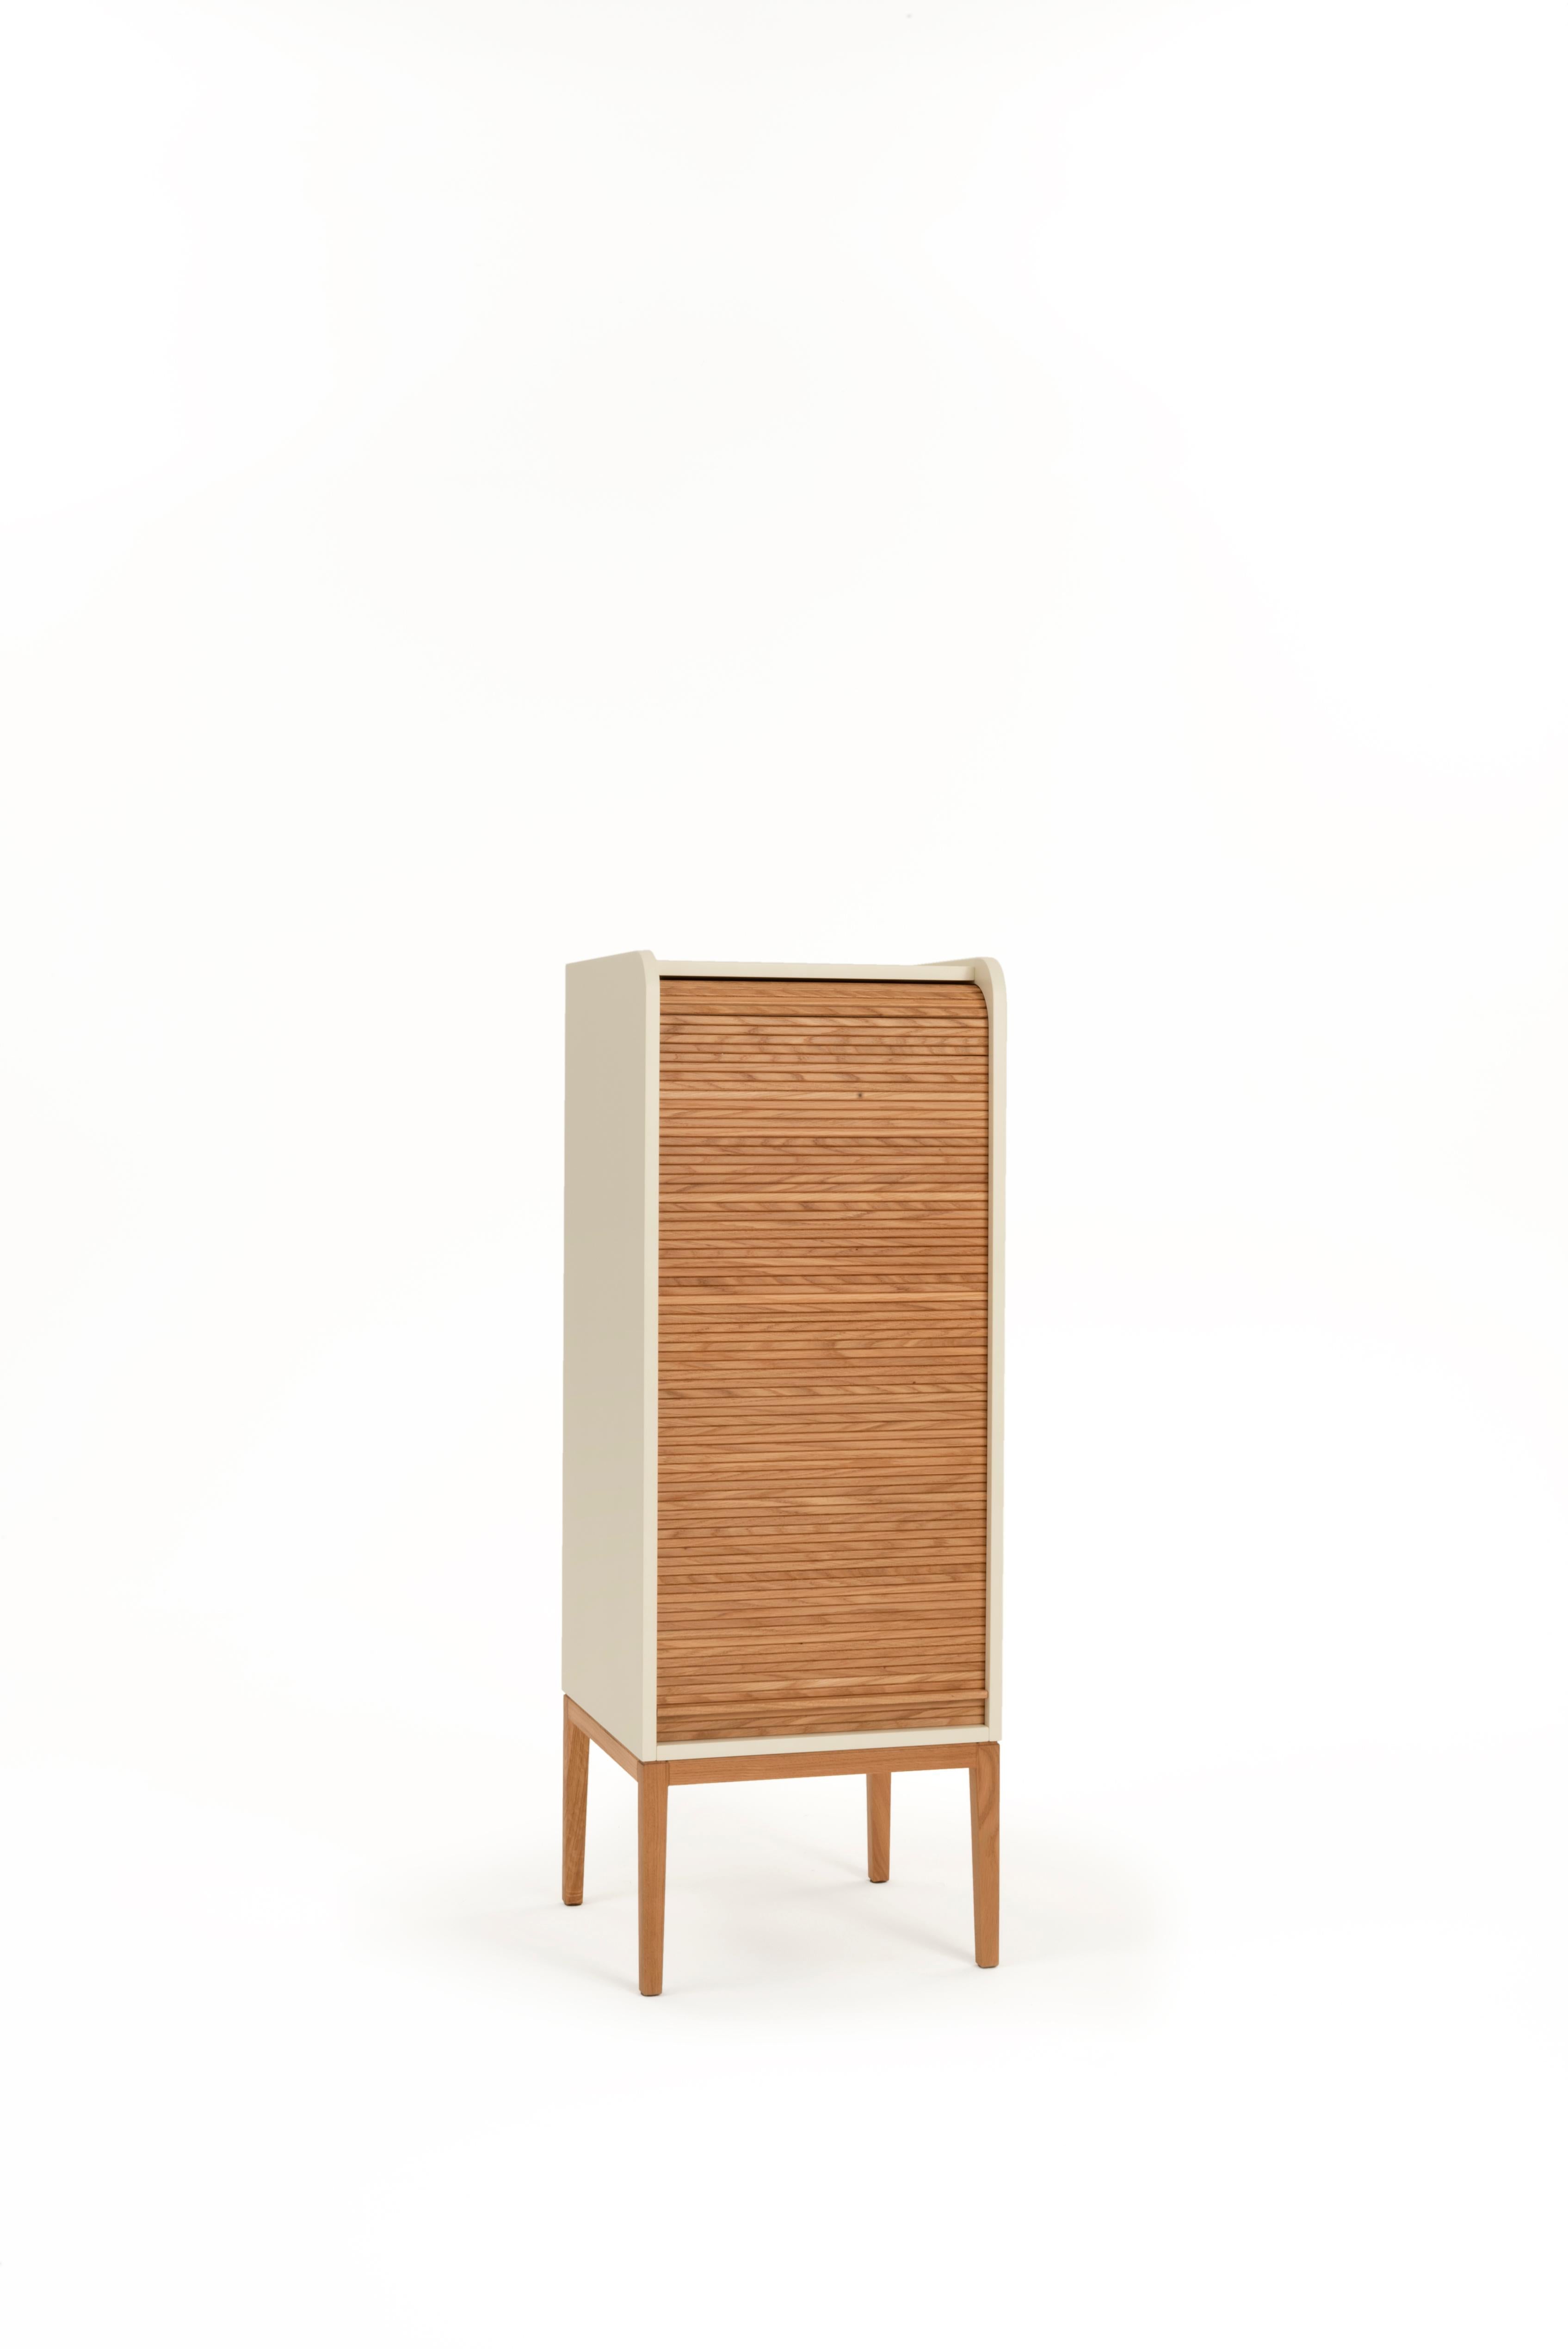 Tapparelle Medium Cabinet, Sand White by Colé Italia with Emmanuel Gallina
Dimensions: H.115 D.42 W.42 cm
Materials: Container with legs and “tapparella” sliding shutter in solid oak.
Matt lacquered structure; inside 2 oak veneered shelf

Also